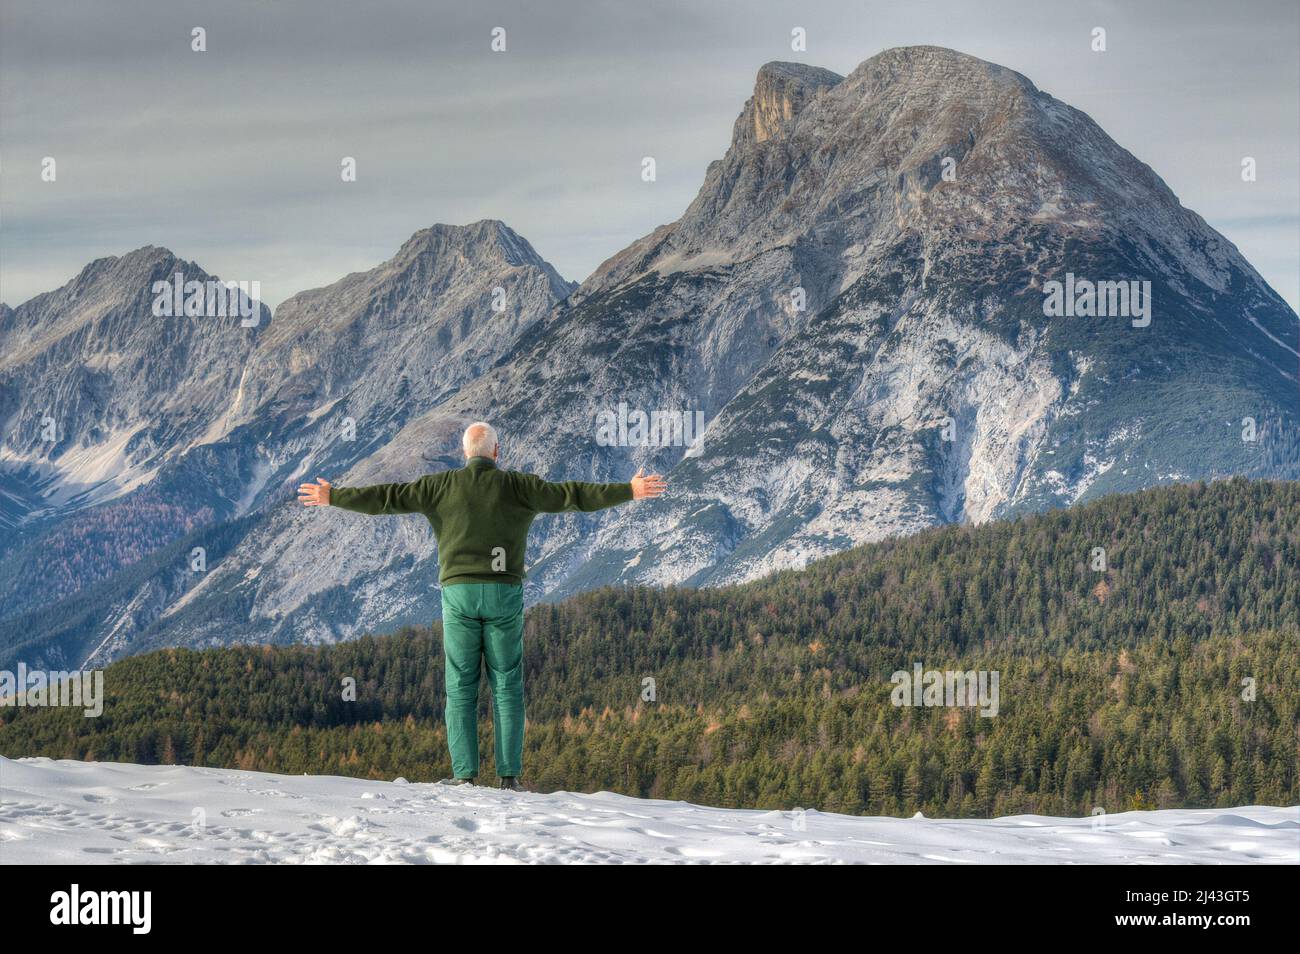 A mountaineer stands in front of the impressive backdrop of the Mount Hohe Munde and would like to embrace this mountain with its unusual shape. Stock Photo